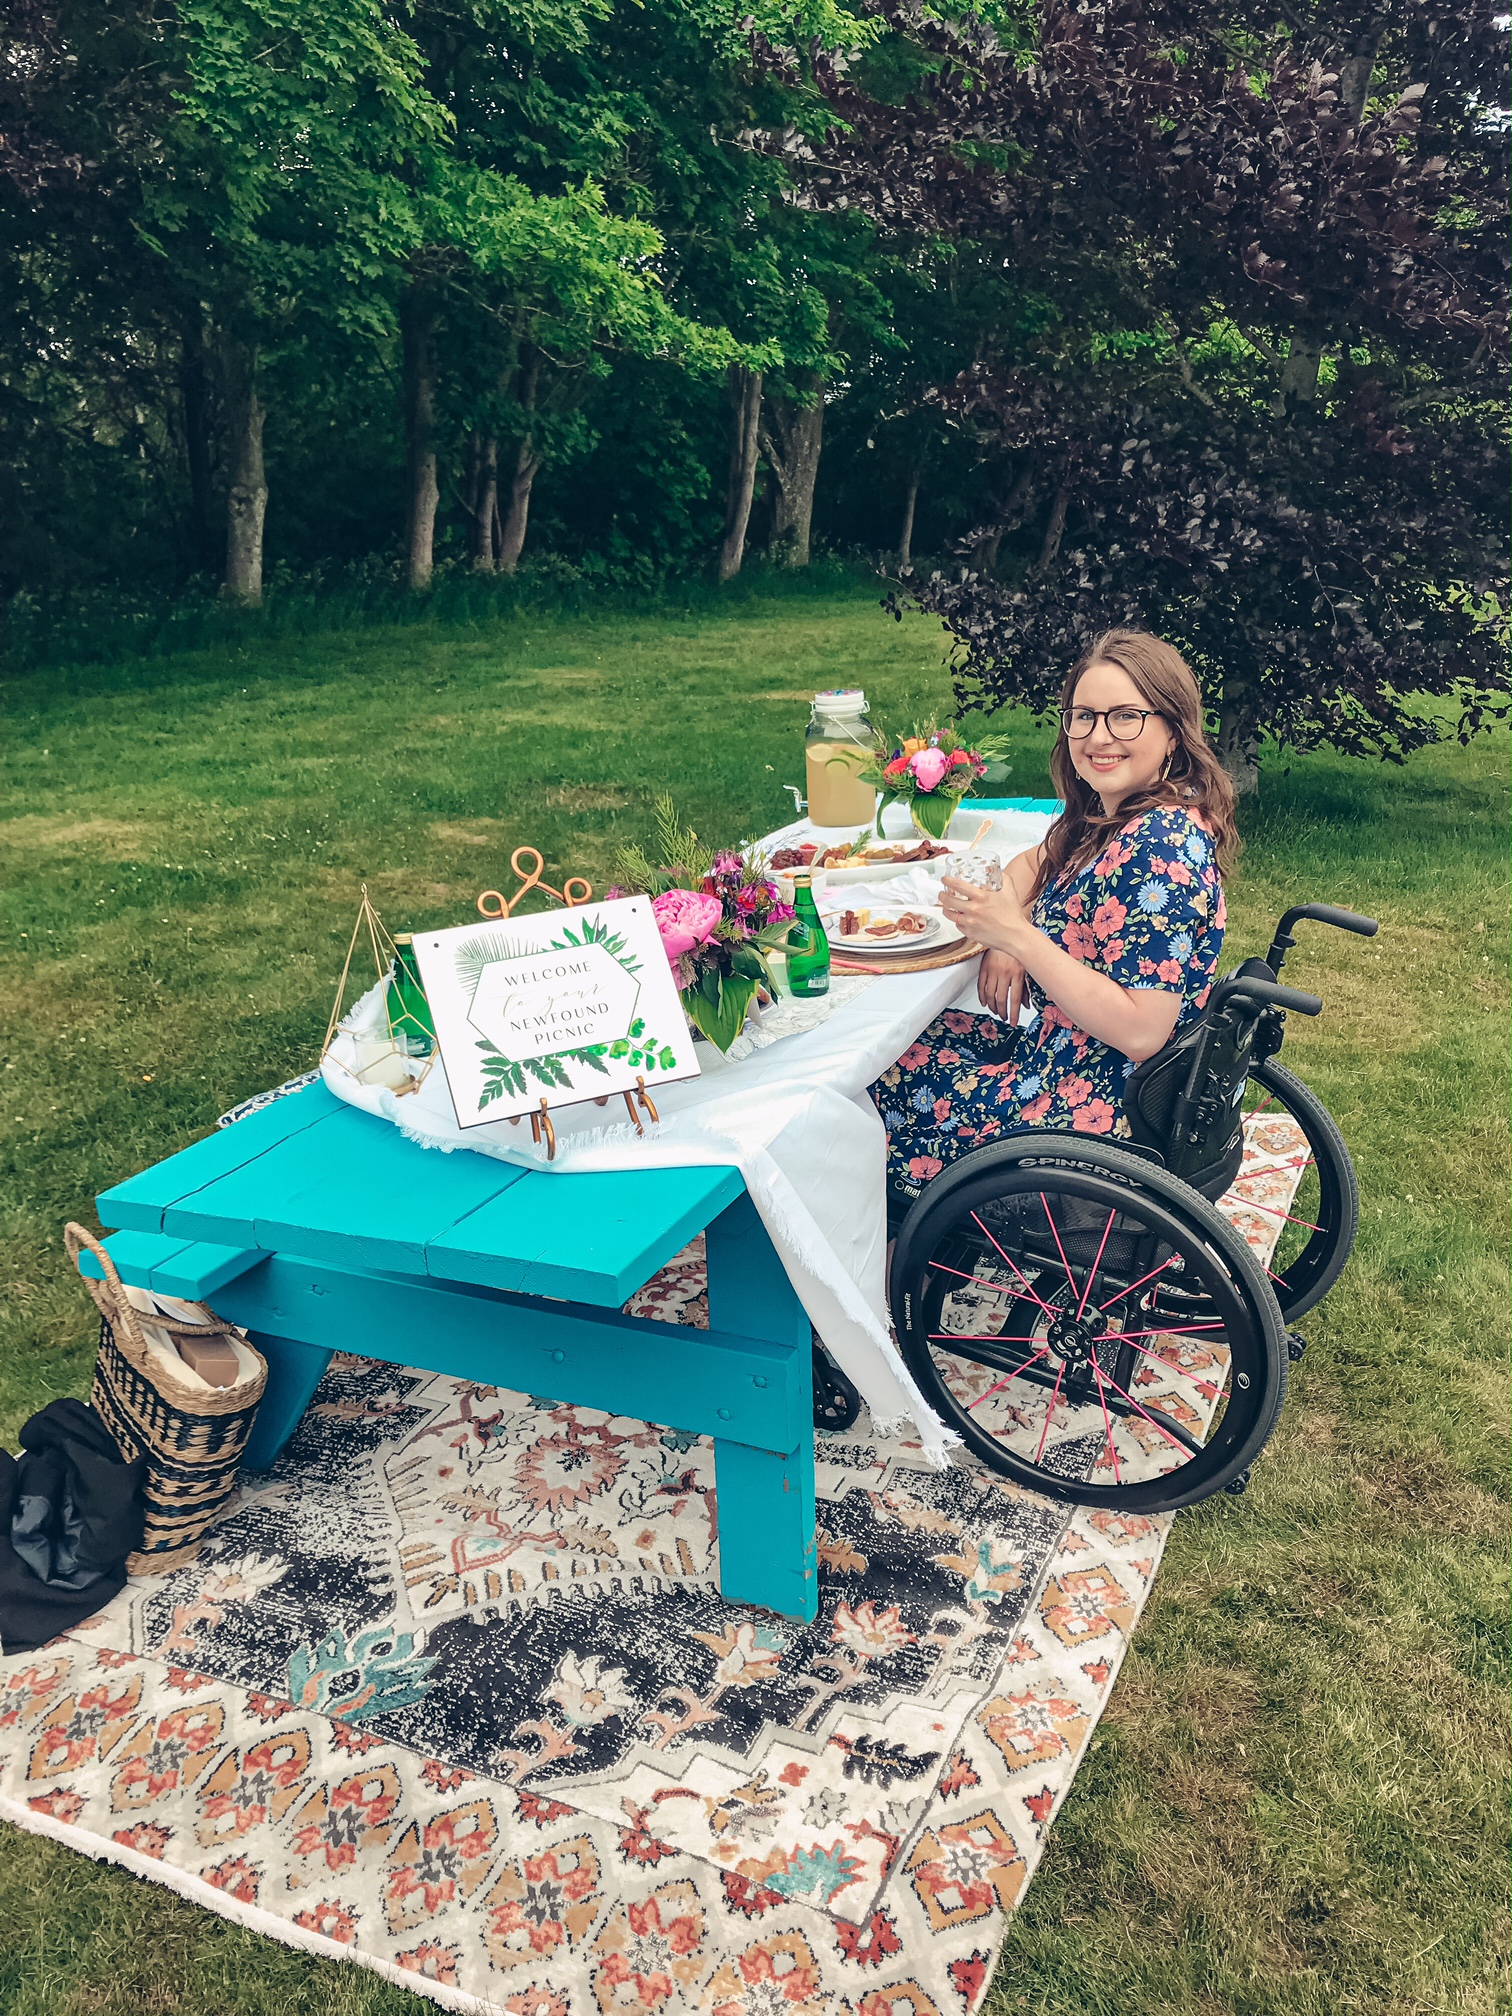 A photo of me sitting in my wheelchair on the accessible side of the picnic table. I'm wearing a navy dress with pink and blue flowers, I'm holding a glass of lemonade and smiling up at the camera.